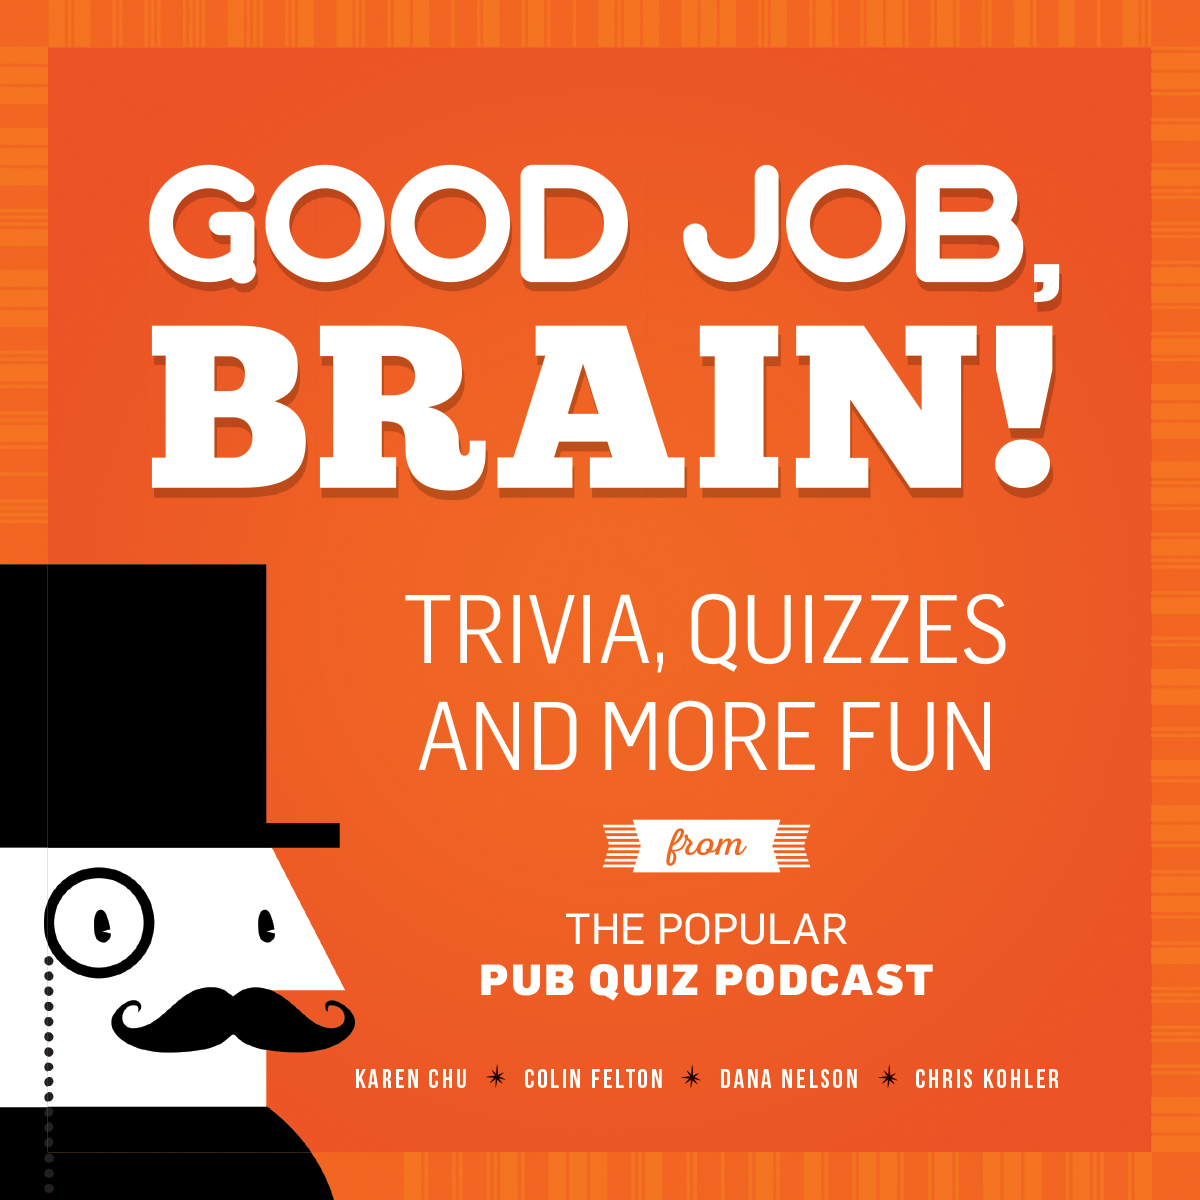 GOOD JOB, BRAIN!: TRIVIA, QUIZZES AND MORE FUN FROM THE POPULAR PUB QUIZ PODCAST